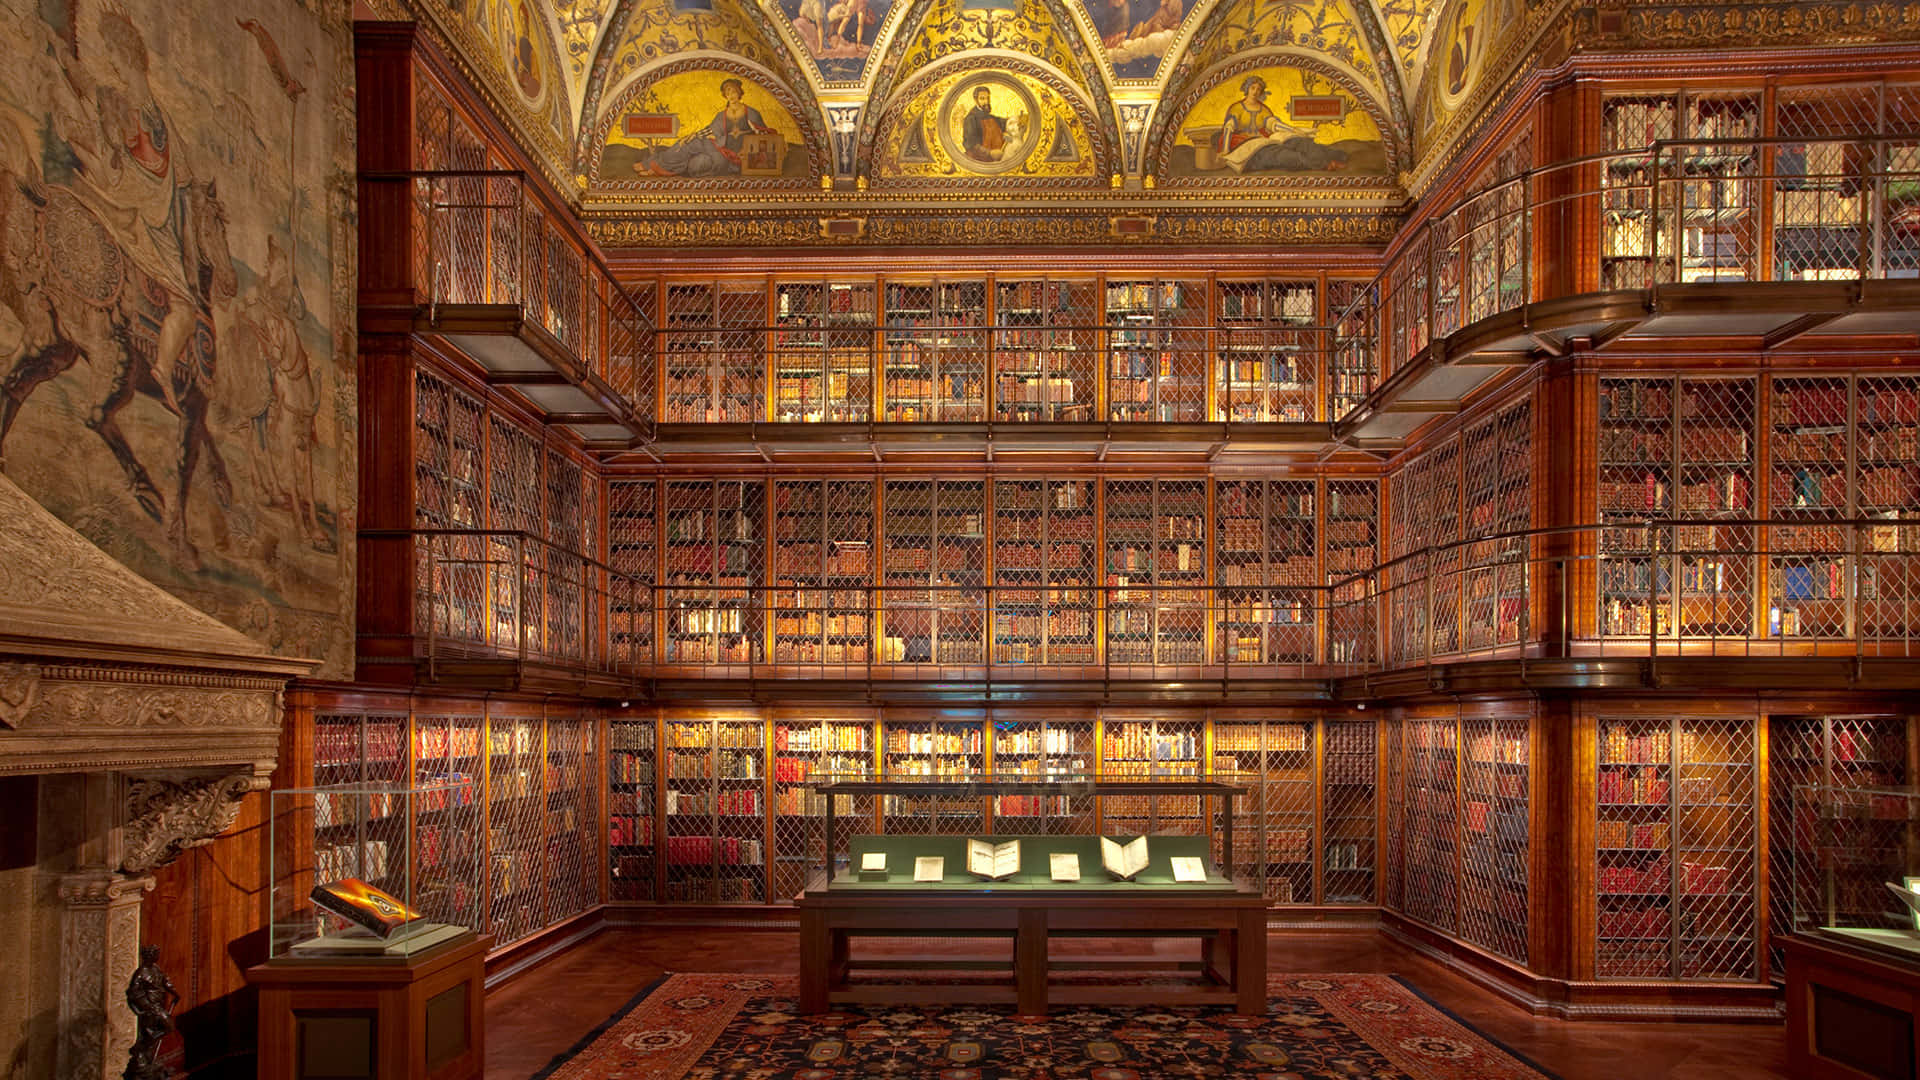 A Large Room With Many Books